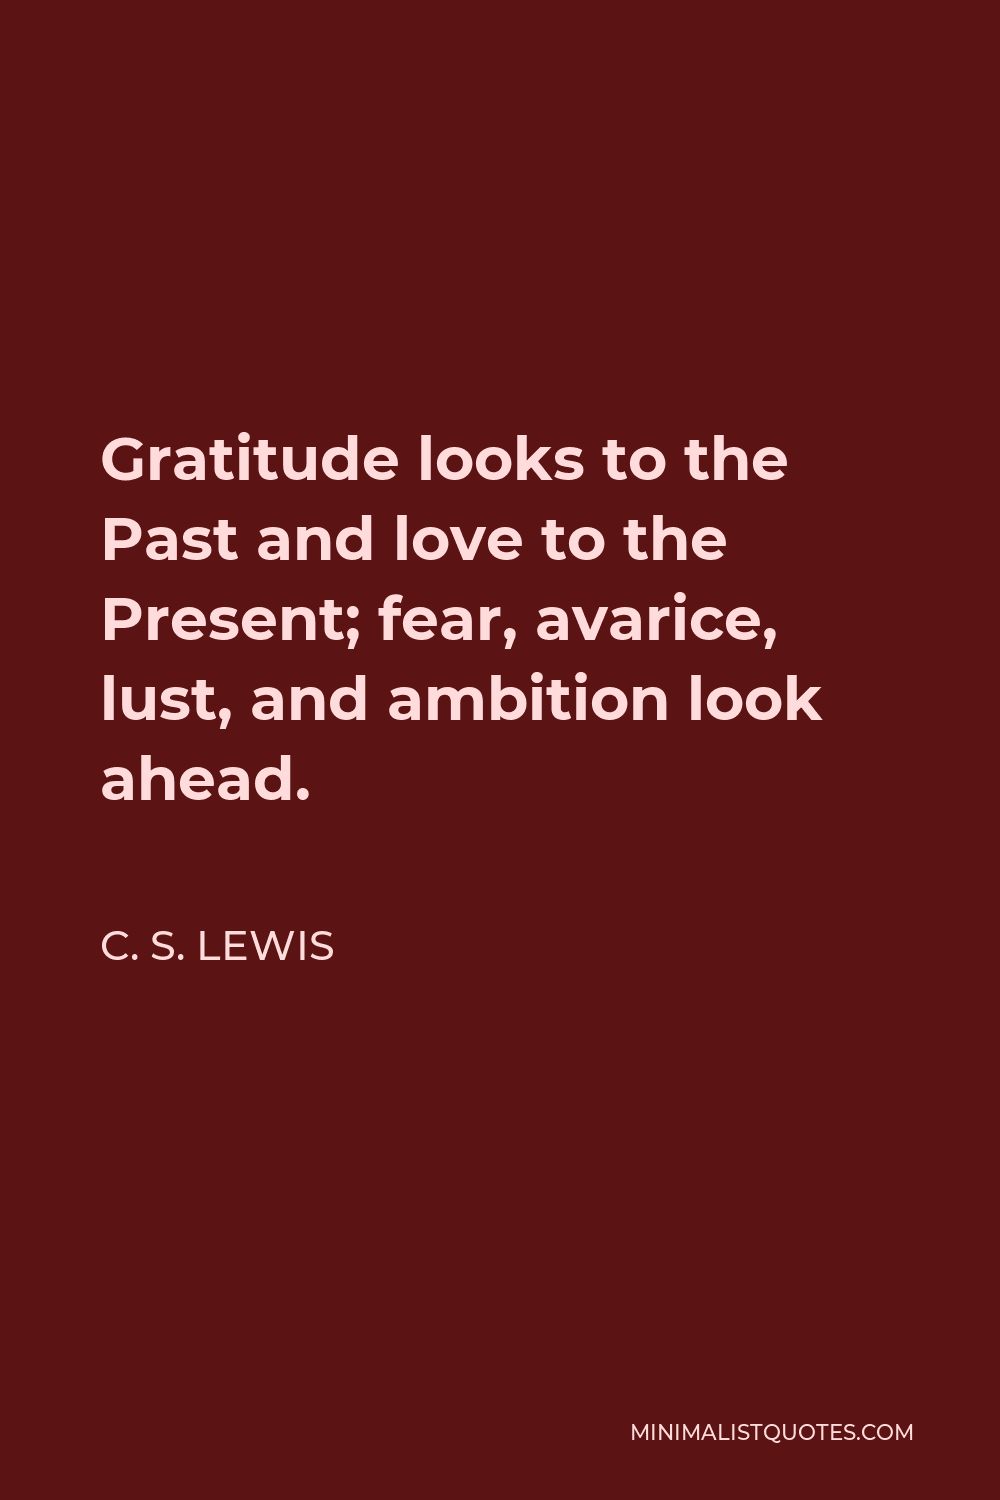 C. S. Lewis Quote - Gratitude looks to the Past and love to the Present; fear, avarice, lust, and ambition look ahead.